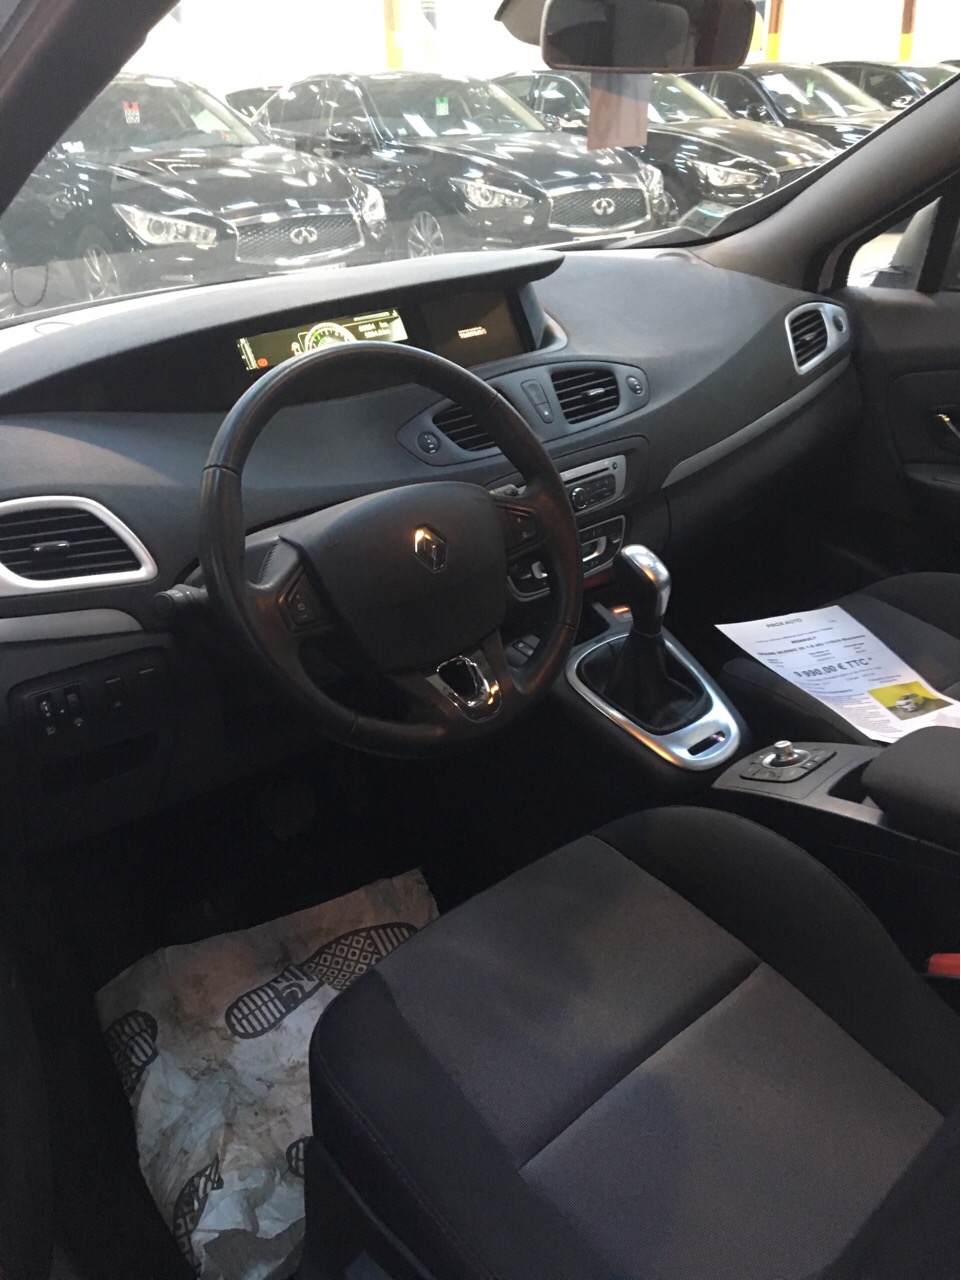 RENAULT GD SCENIC (01/06/2014) - 